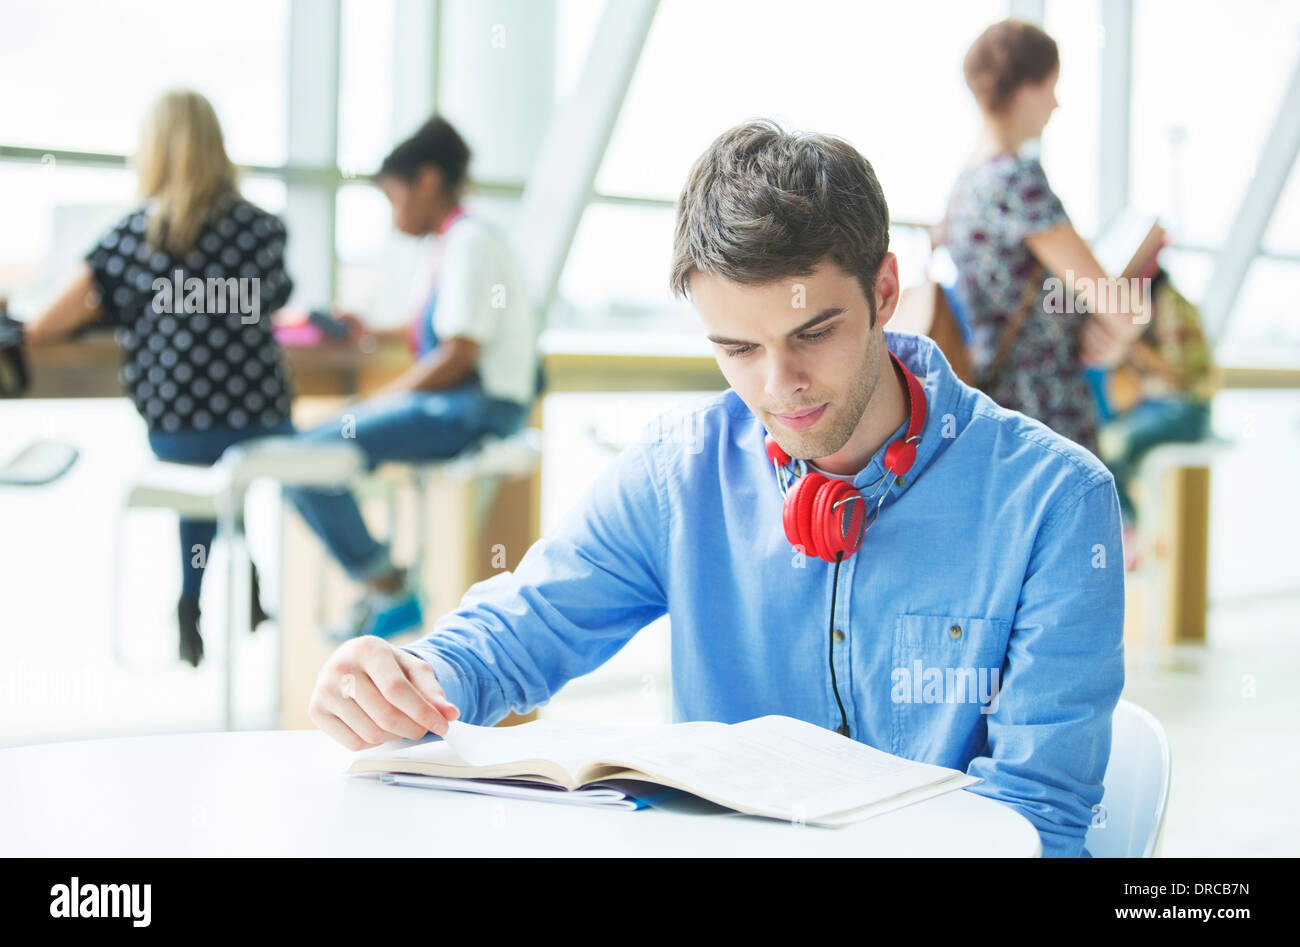 University student reading in cafe Stock Photo